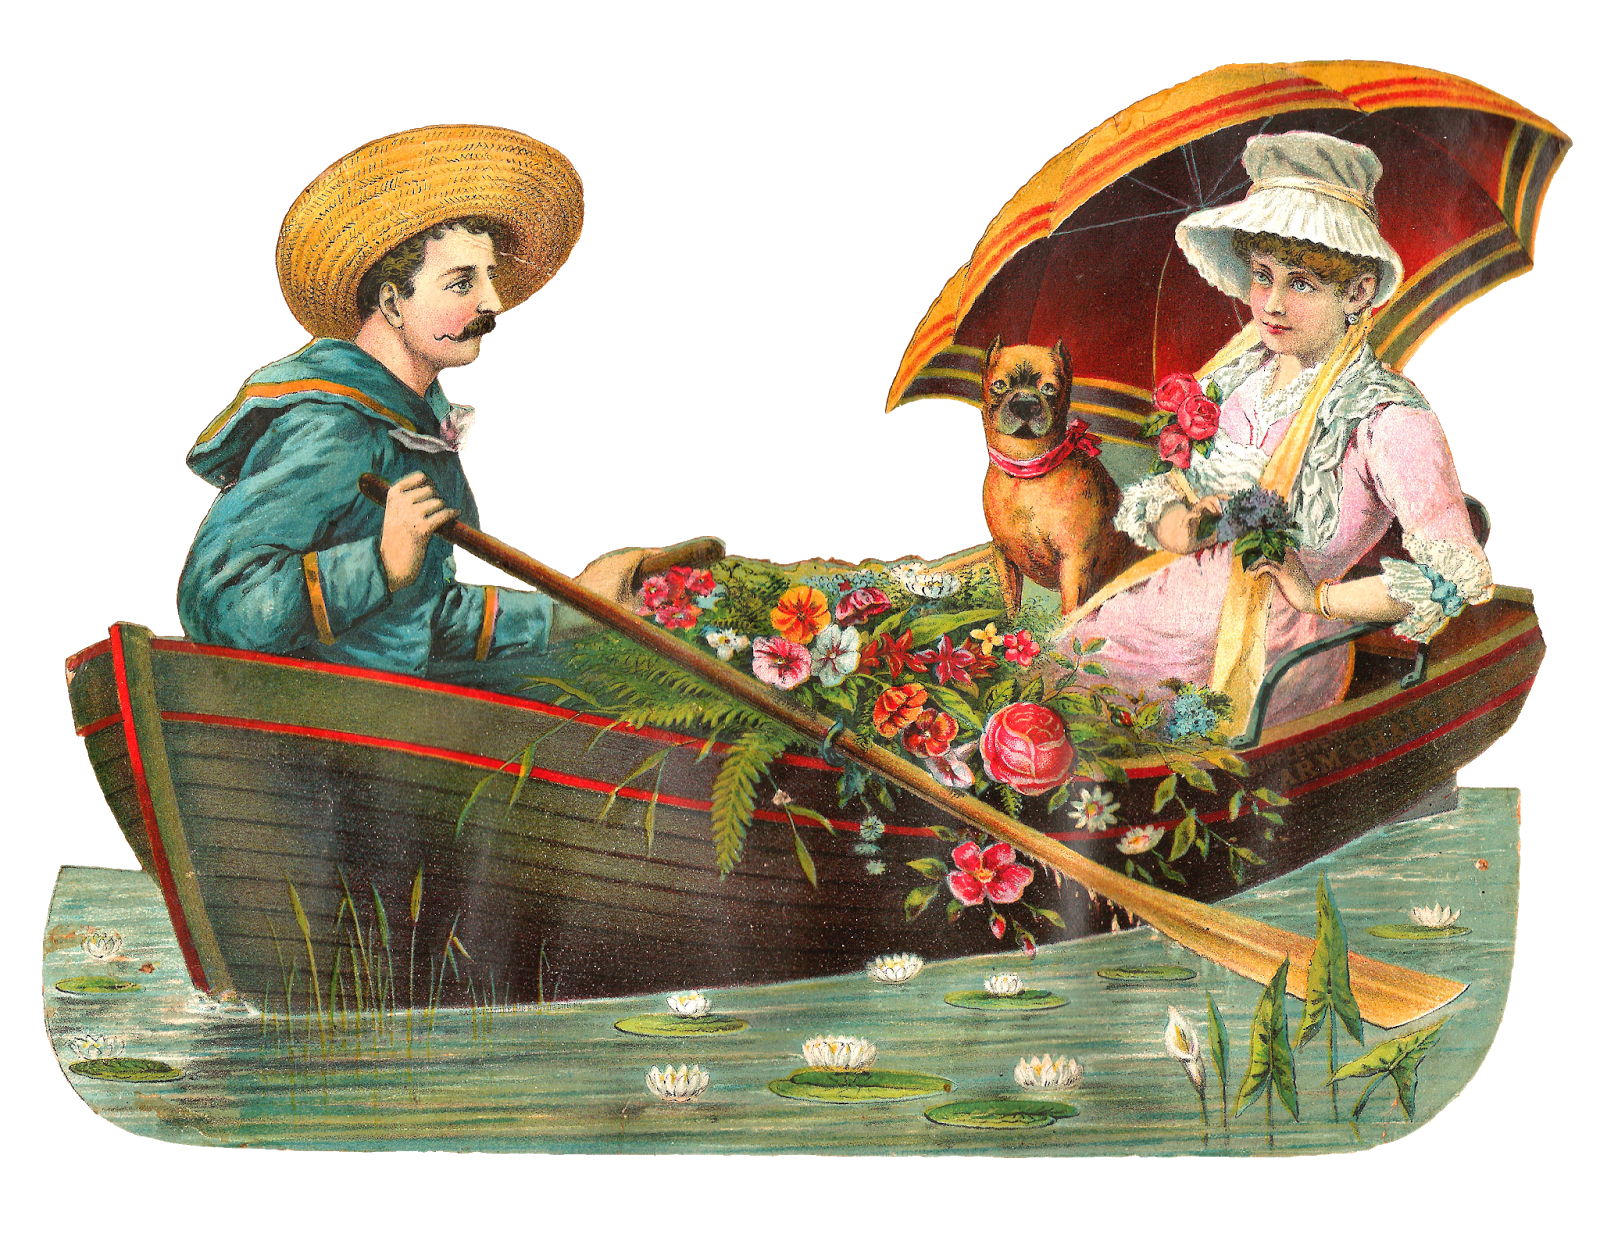 Antique Images  Free Romantic Clip Art  Victorian Graphic Of Couple In    